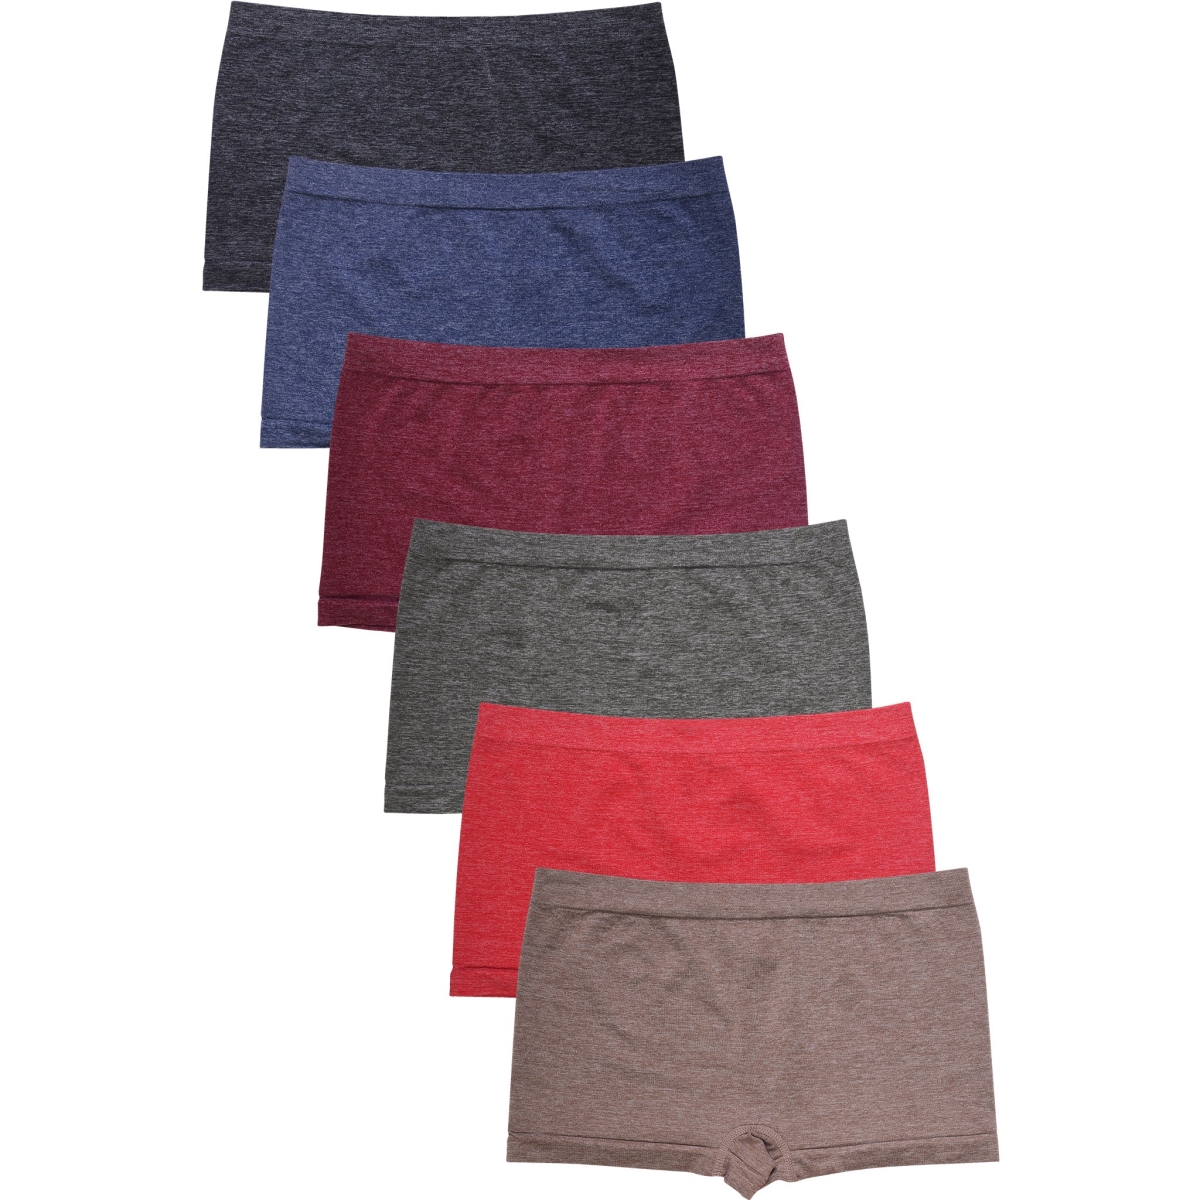 Picture of 247 Frenzy 247-LP0223SB1 Sofra Womens Essentials Seamless Nylon Stretch Boyshort Panty Underwear - Assorted Color - One Size - Pack of 6